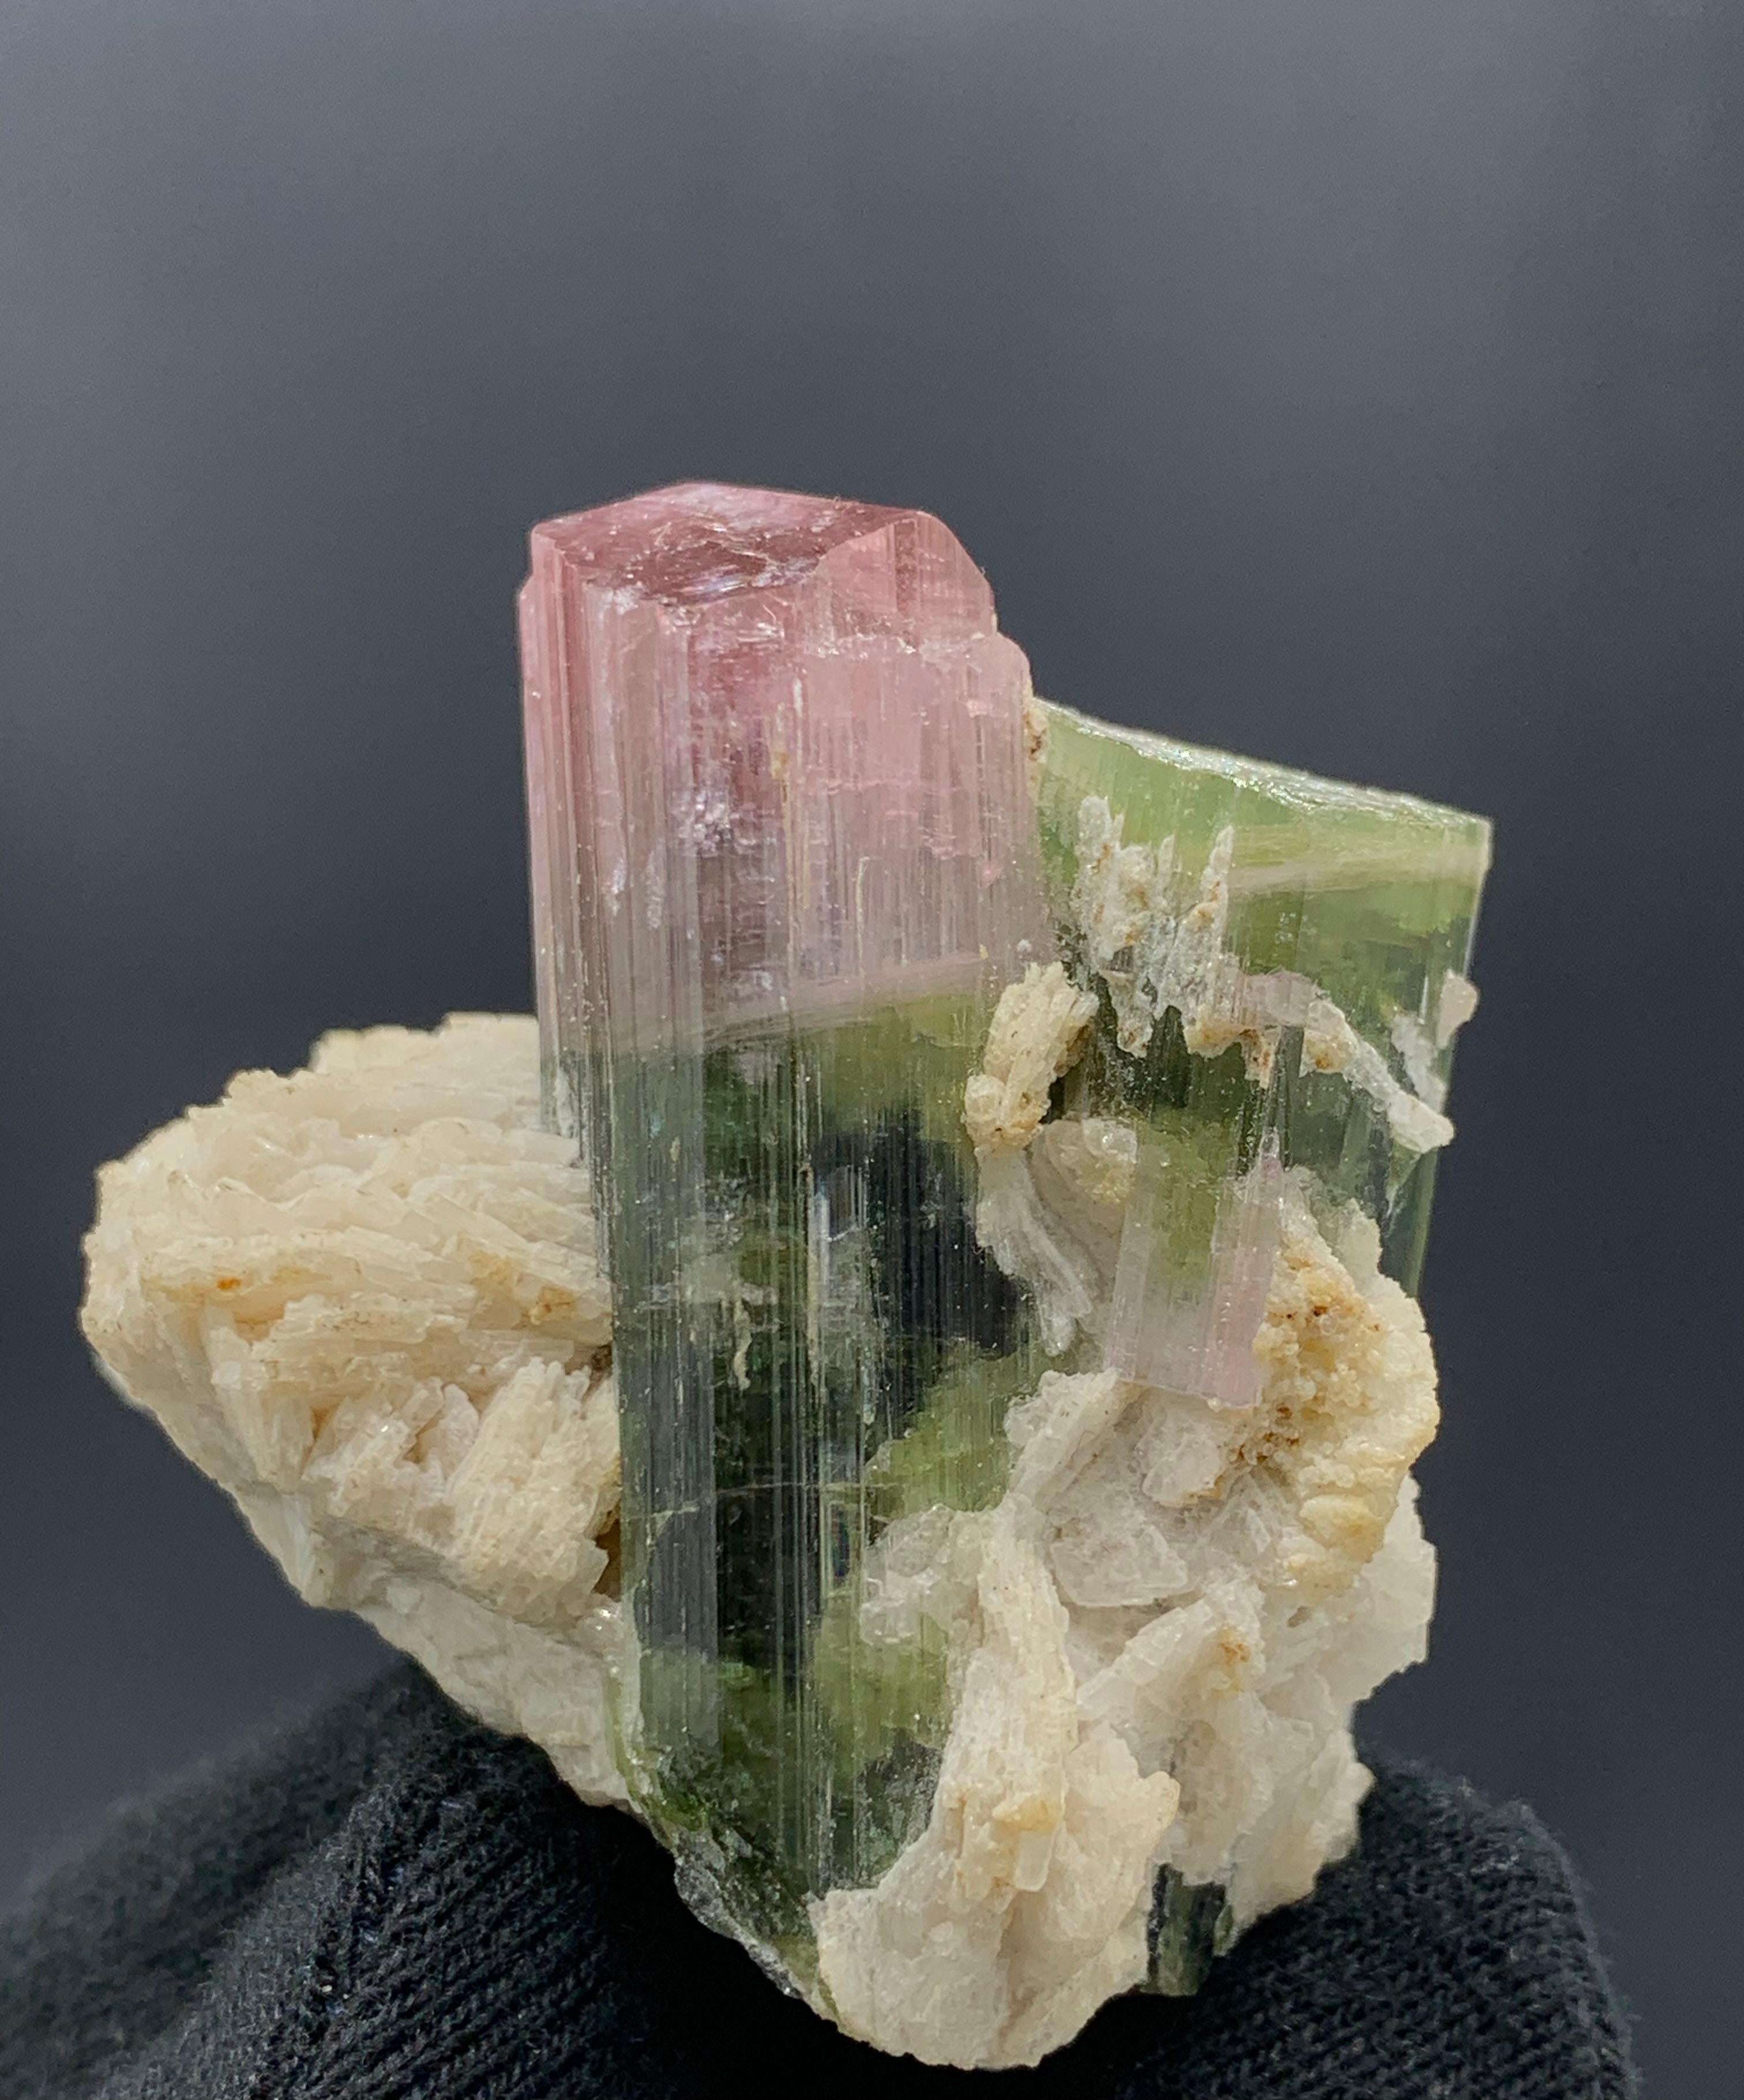 84.06 Gram Pretty Bi Color Tourmaline Specimen Attached With Albite 

Weight: 84.06 Gram
Dimension: 5.2 x 6.3 x 3.9 Cm 
Origin: Paprook, Afghanistan 

Tourmaline is a crystalline silicate mineral group in which boron is compounded with elements such